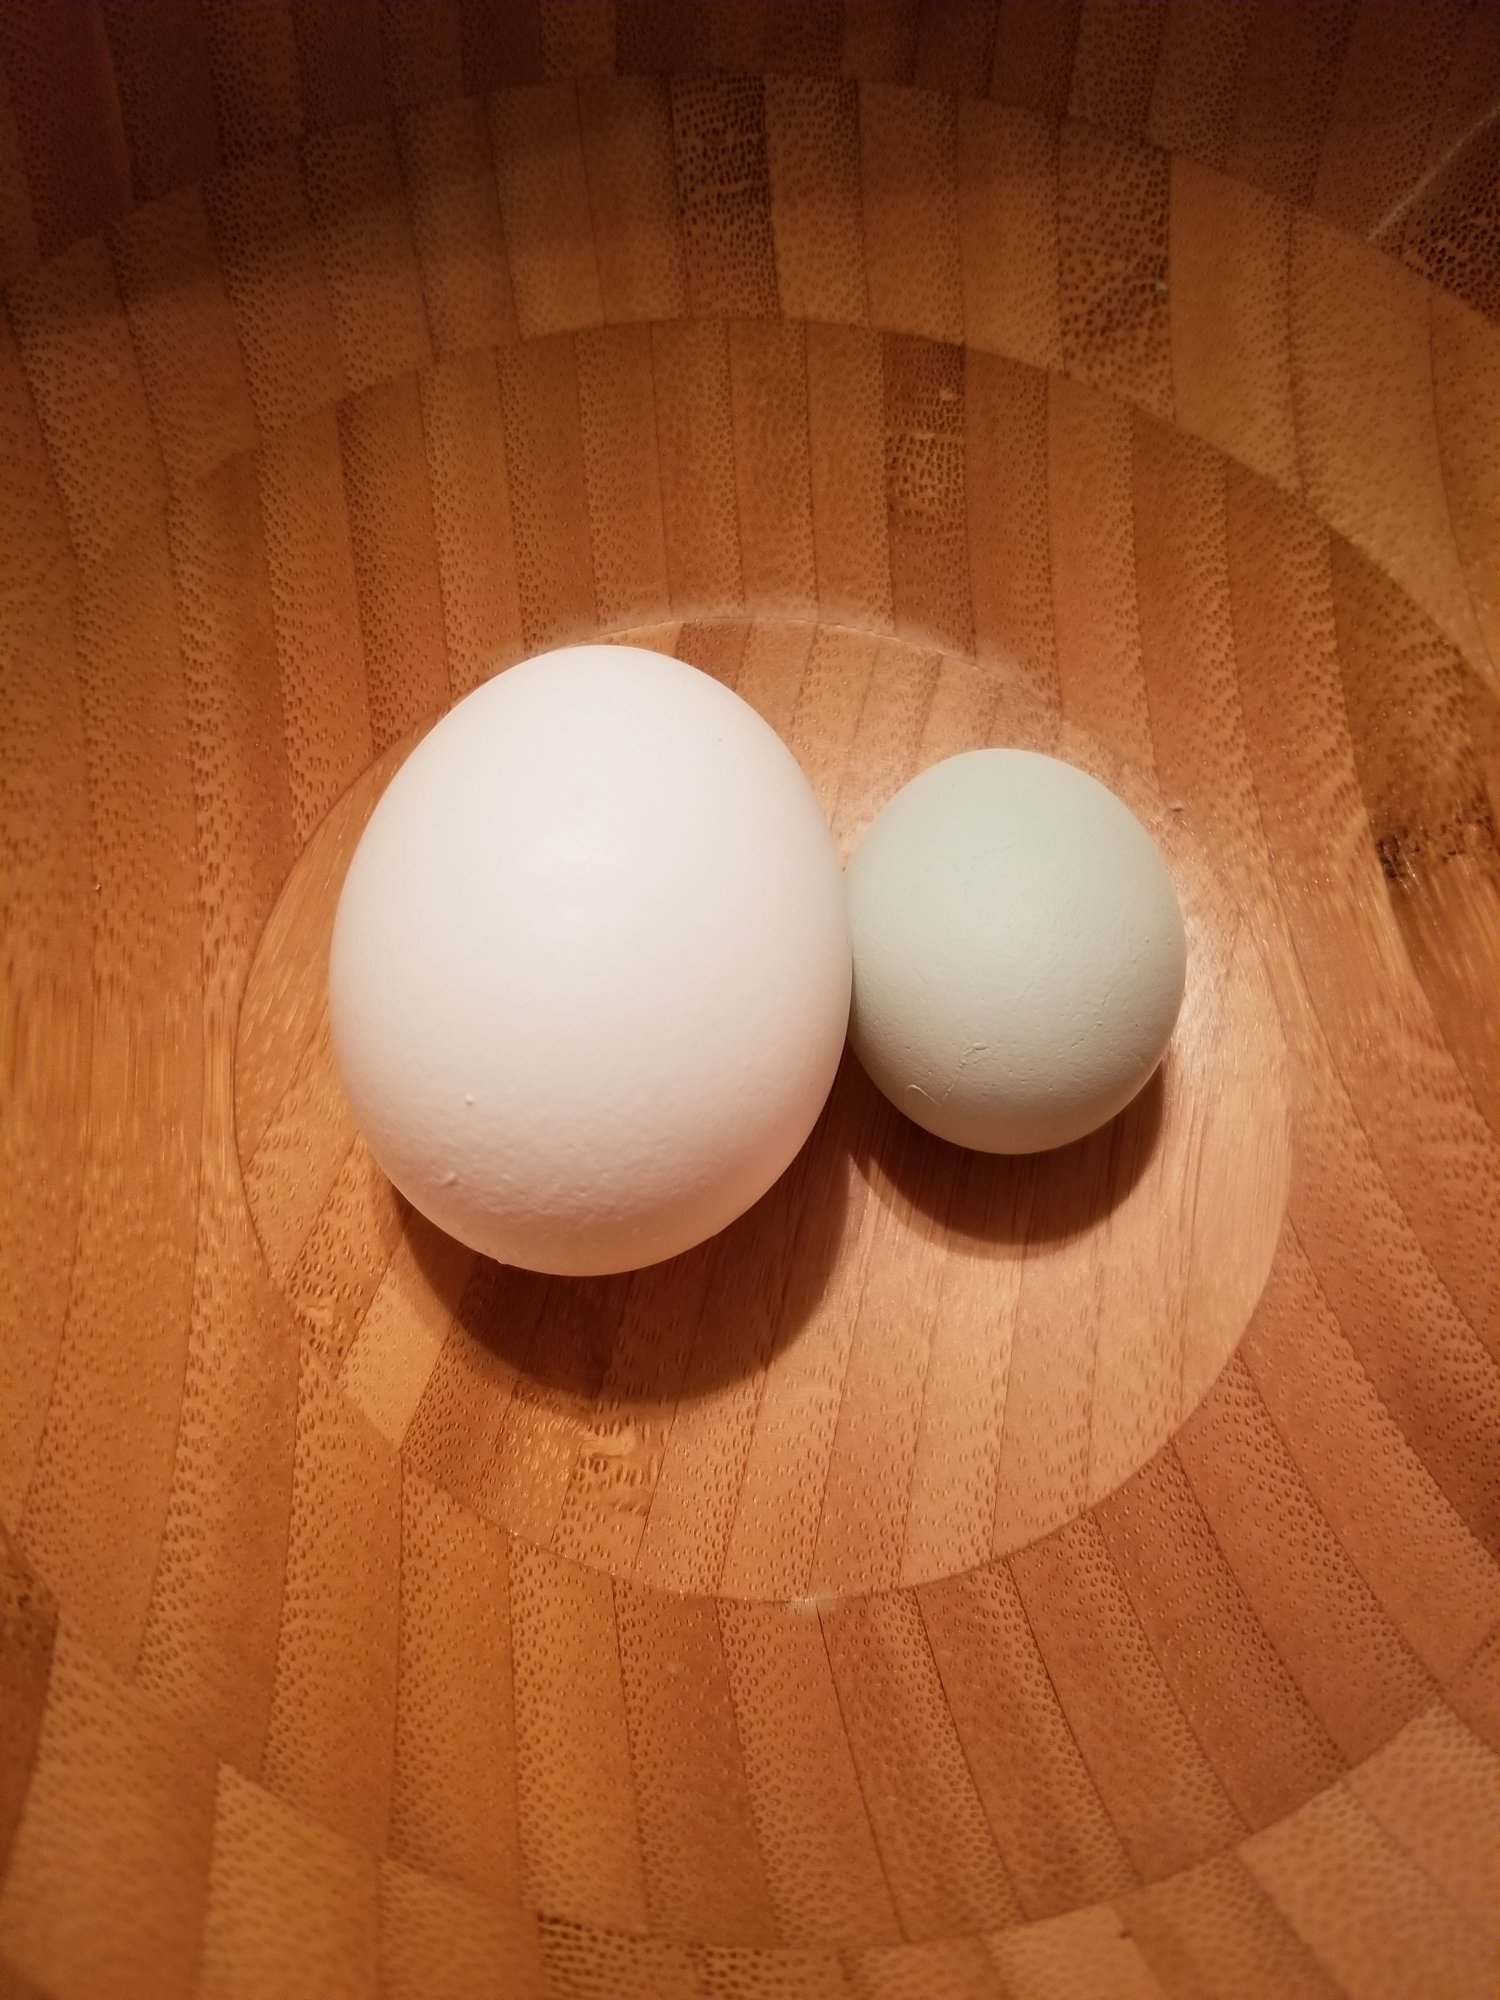 First Egg - Size Comparison